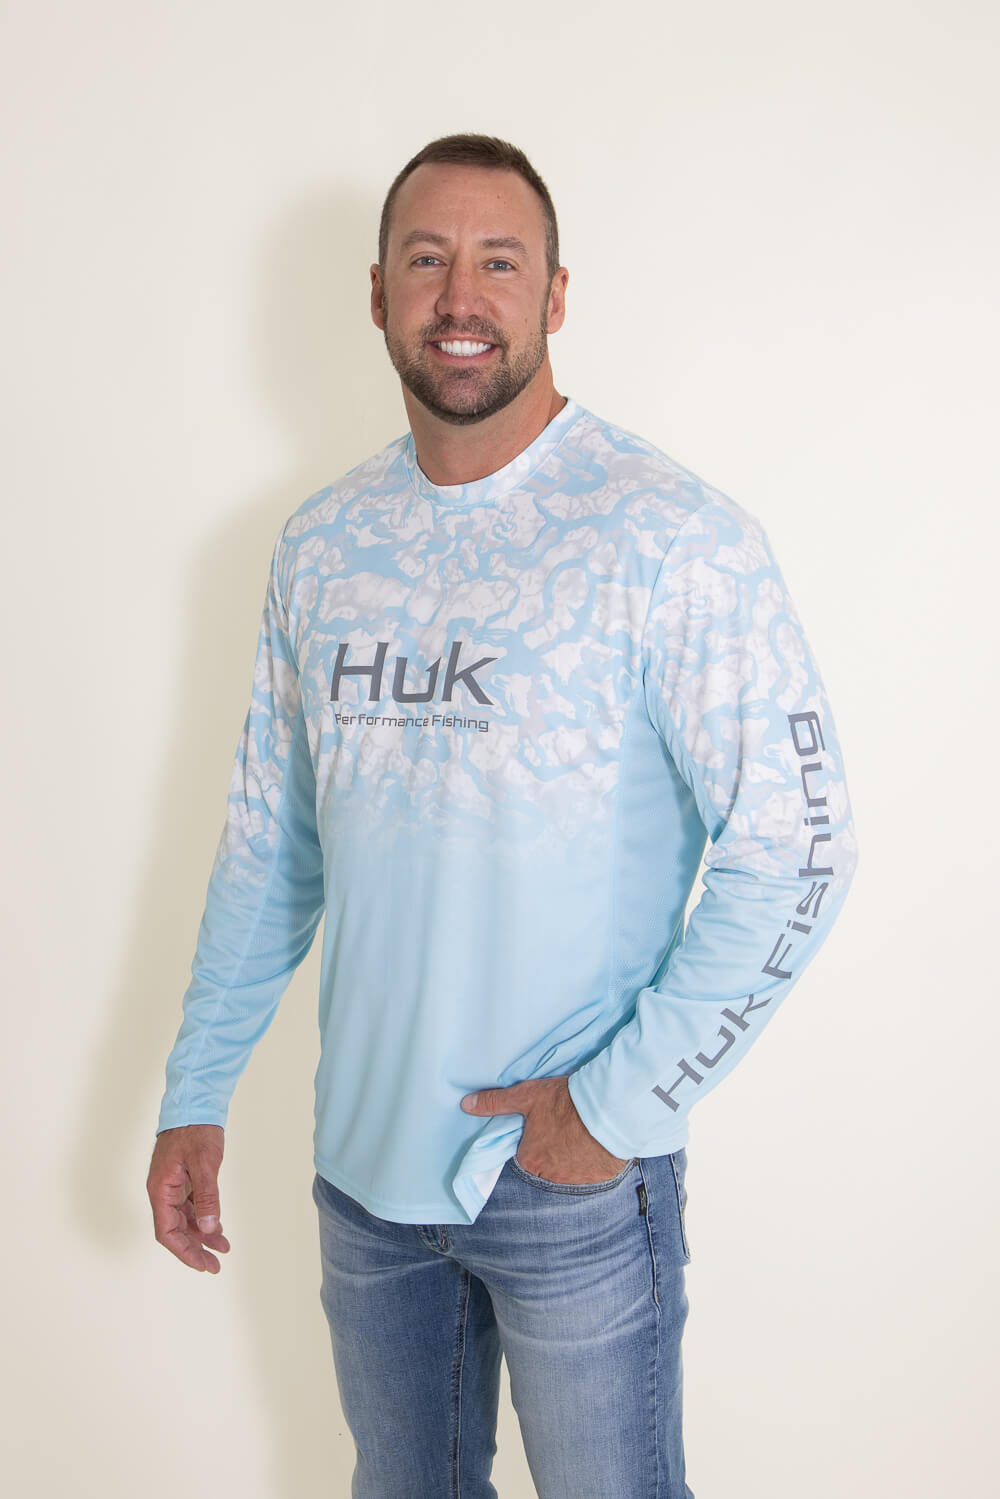 Huk White Fishing Shirts & Tops for sale